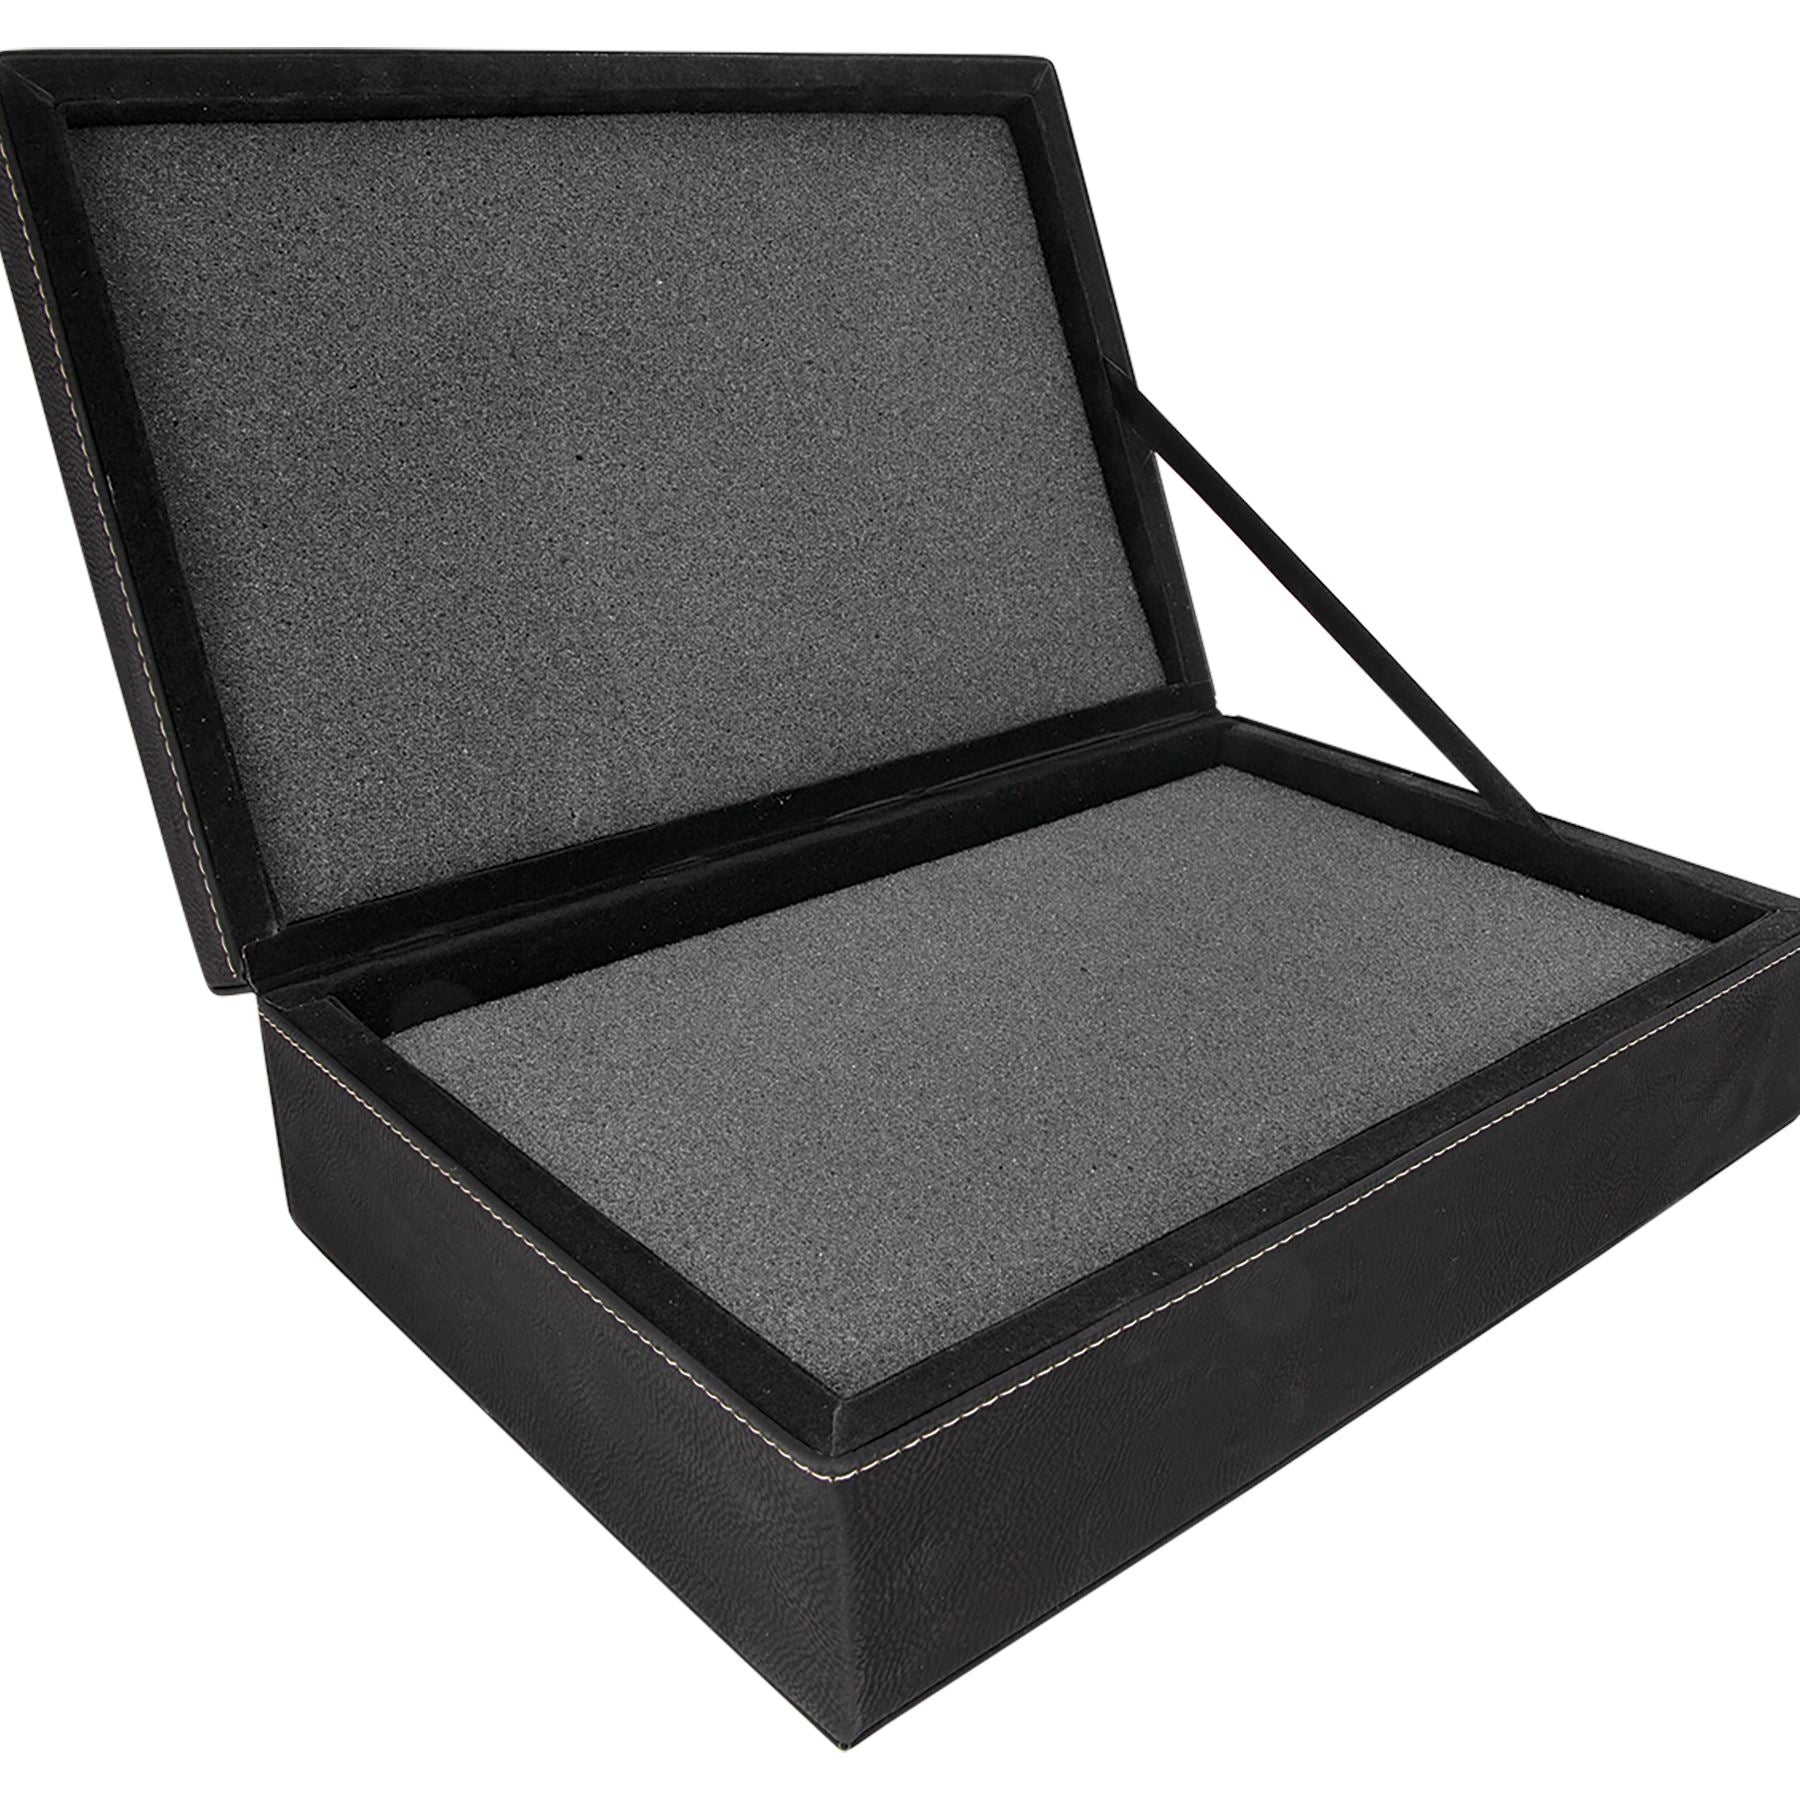 Premium Gift Box, 12 1/4" x 8 1/4" Laserable Leatherette Gift Box Craftworks NW 